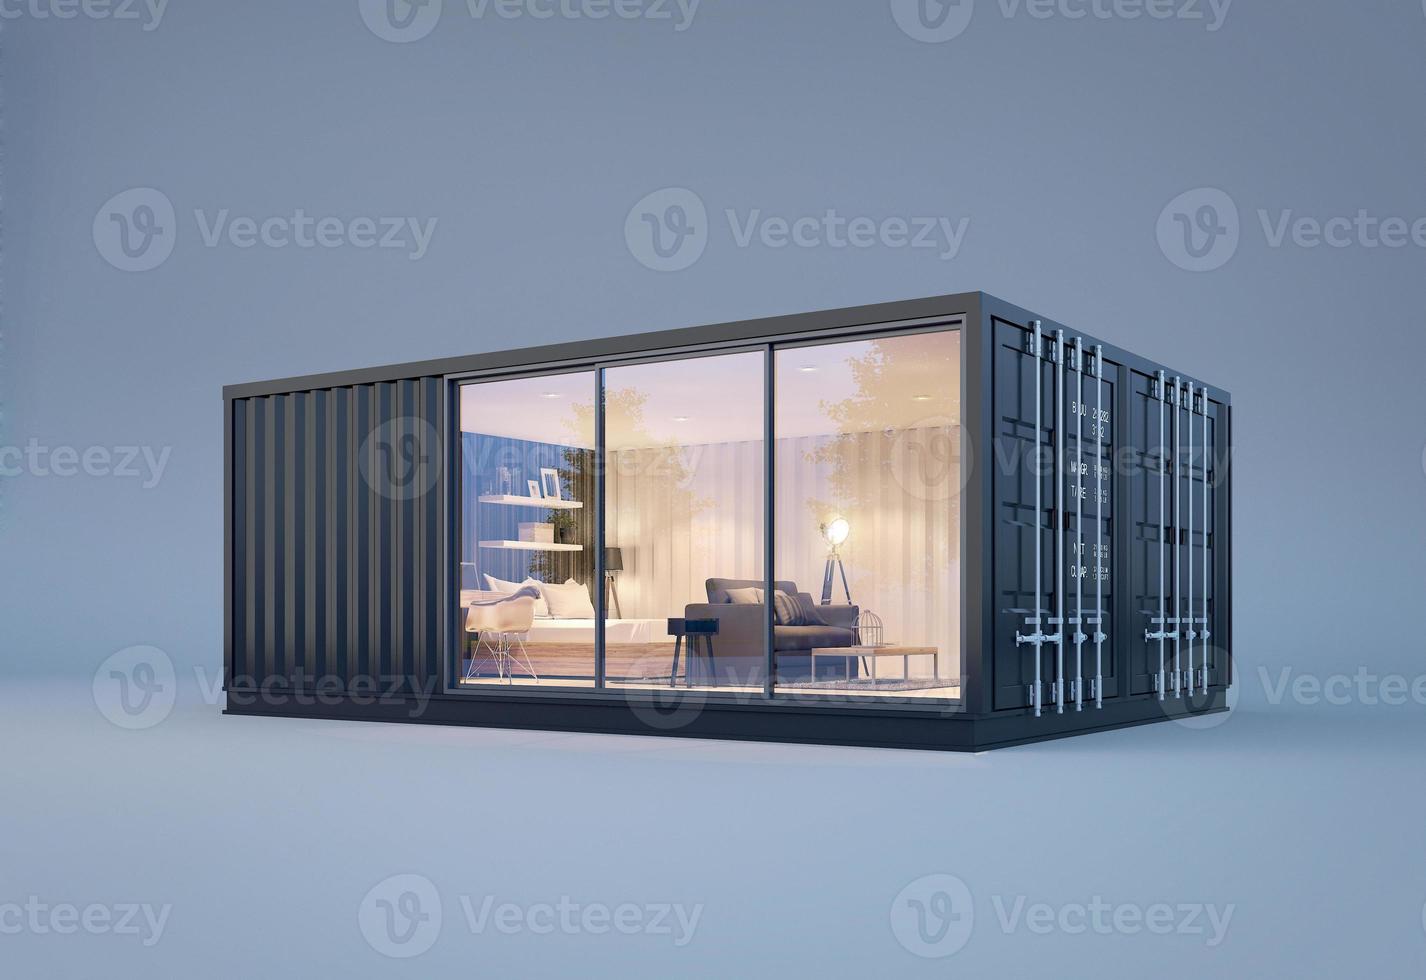 https://static.vecteezy.com/system/resources/previews/019/050/620/non_2x/container-house-isolated-on-background-3d-rendering-photo.jpg